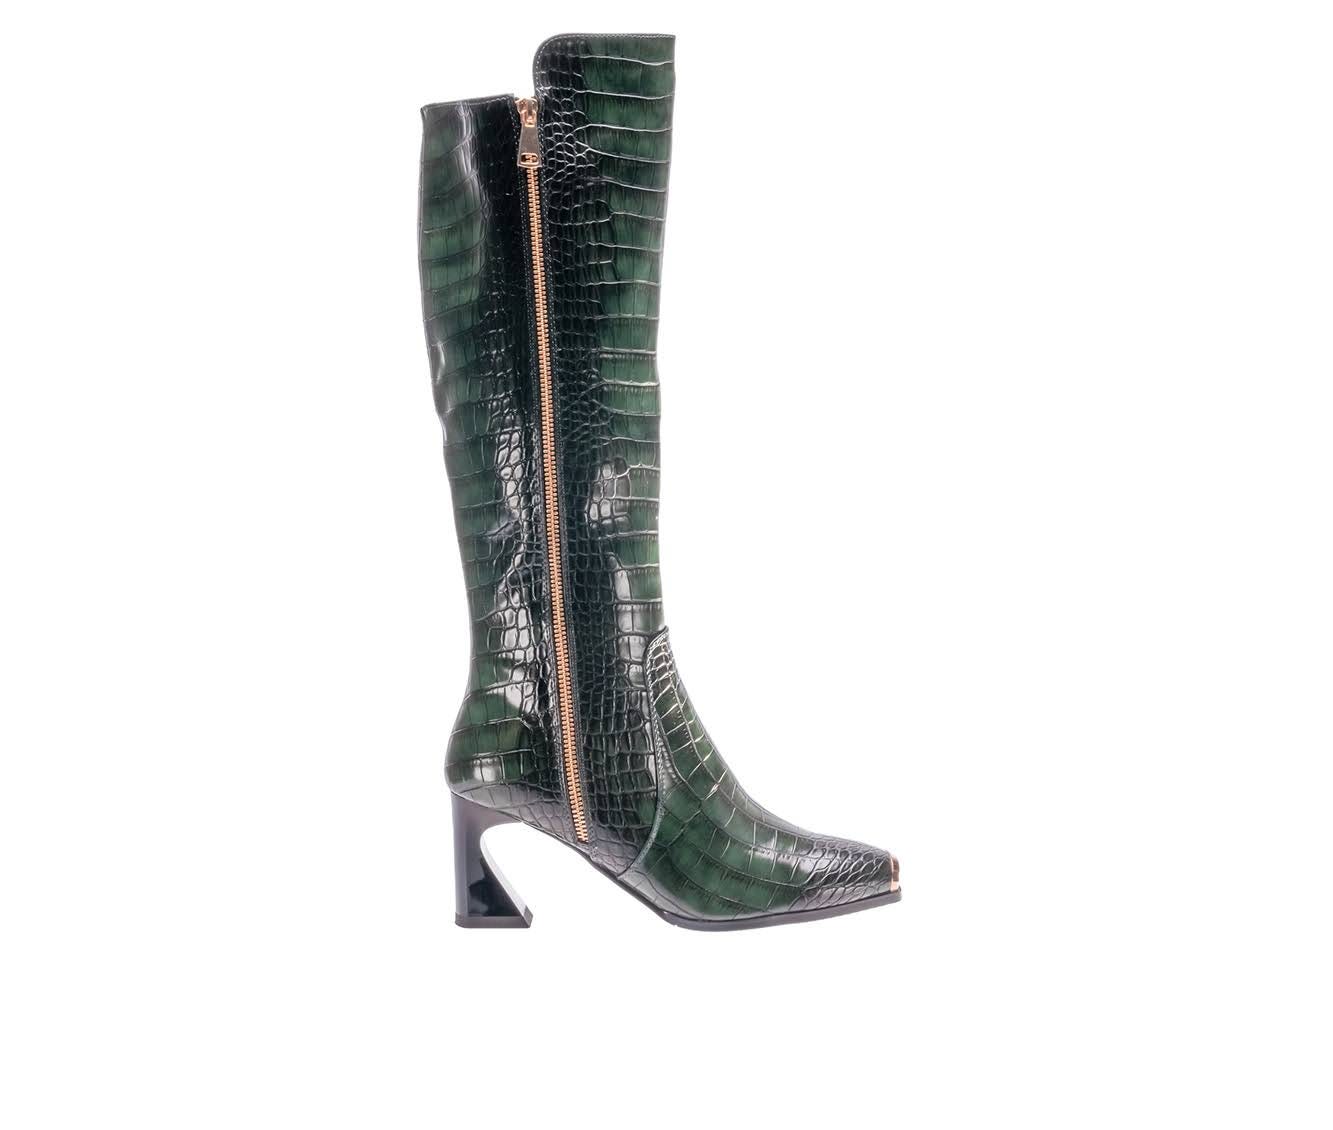 Croc-Embossed Green Knee-High Boots with 3-Inch Heel | Image